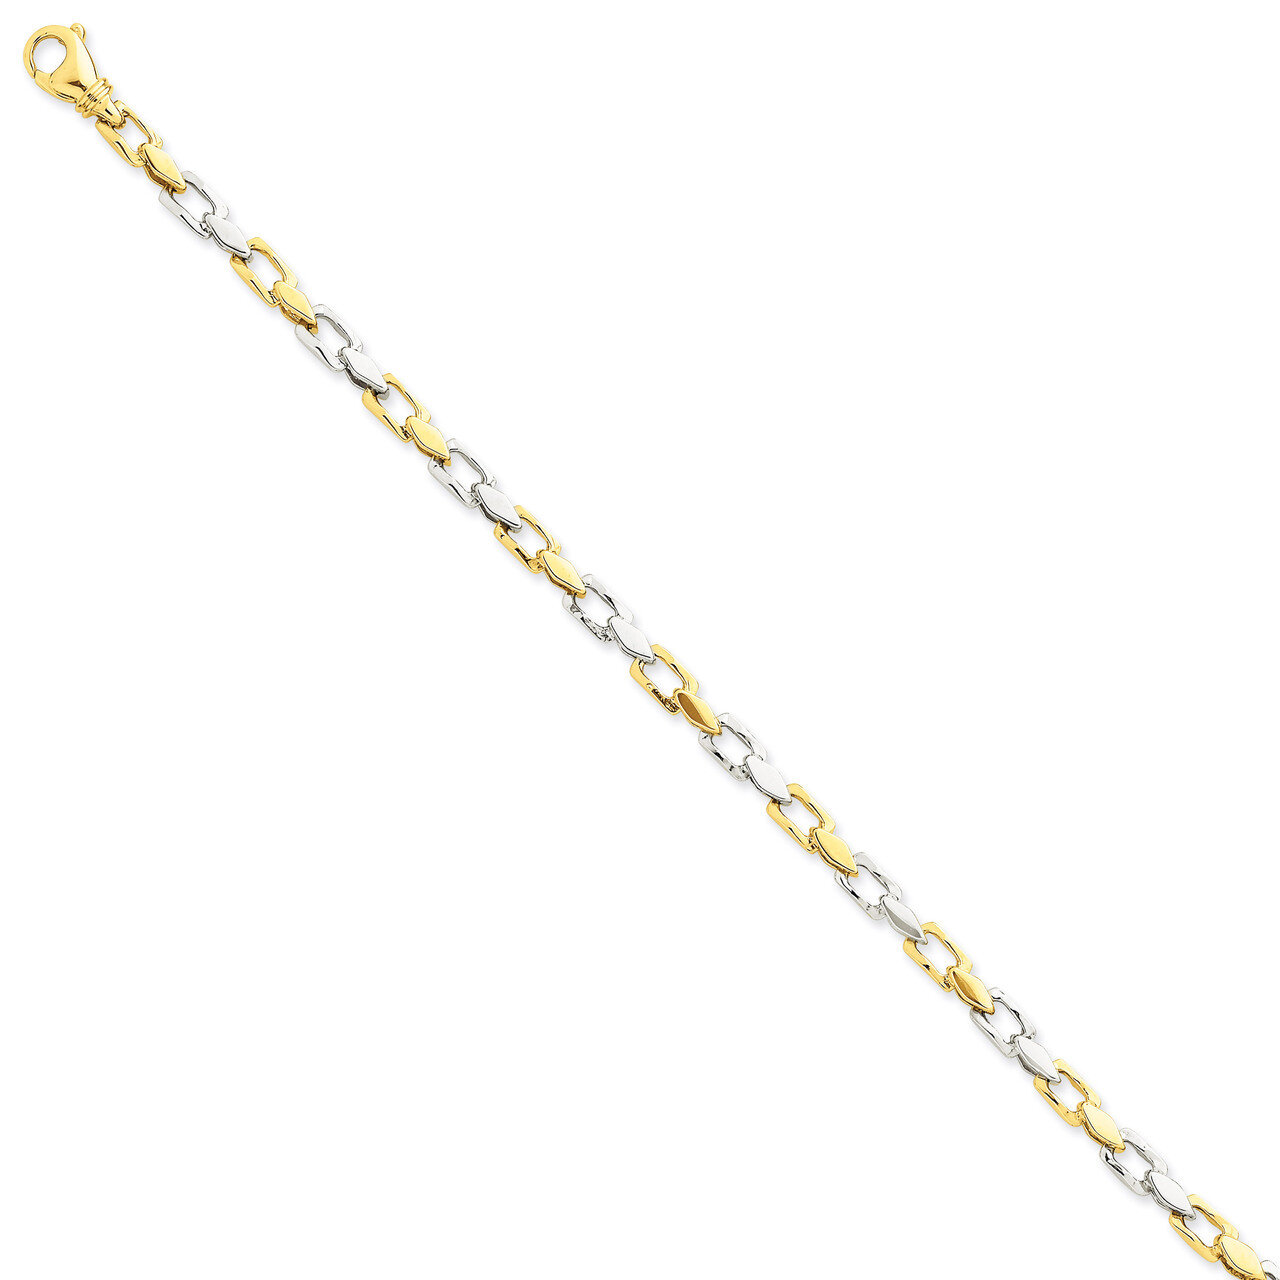 4.5mm Hand-polished Fancy Link Chain 8 Inch 14k Two-Tone Gold LK305A-8